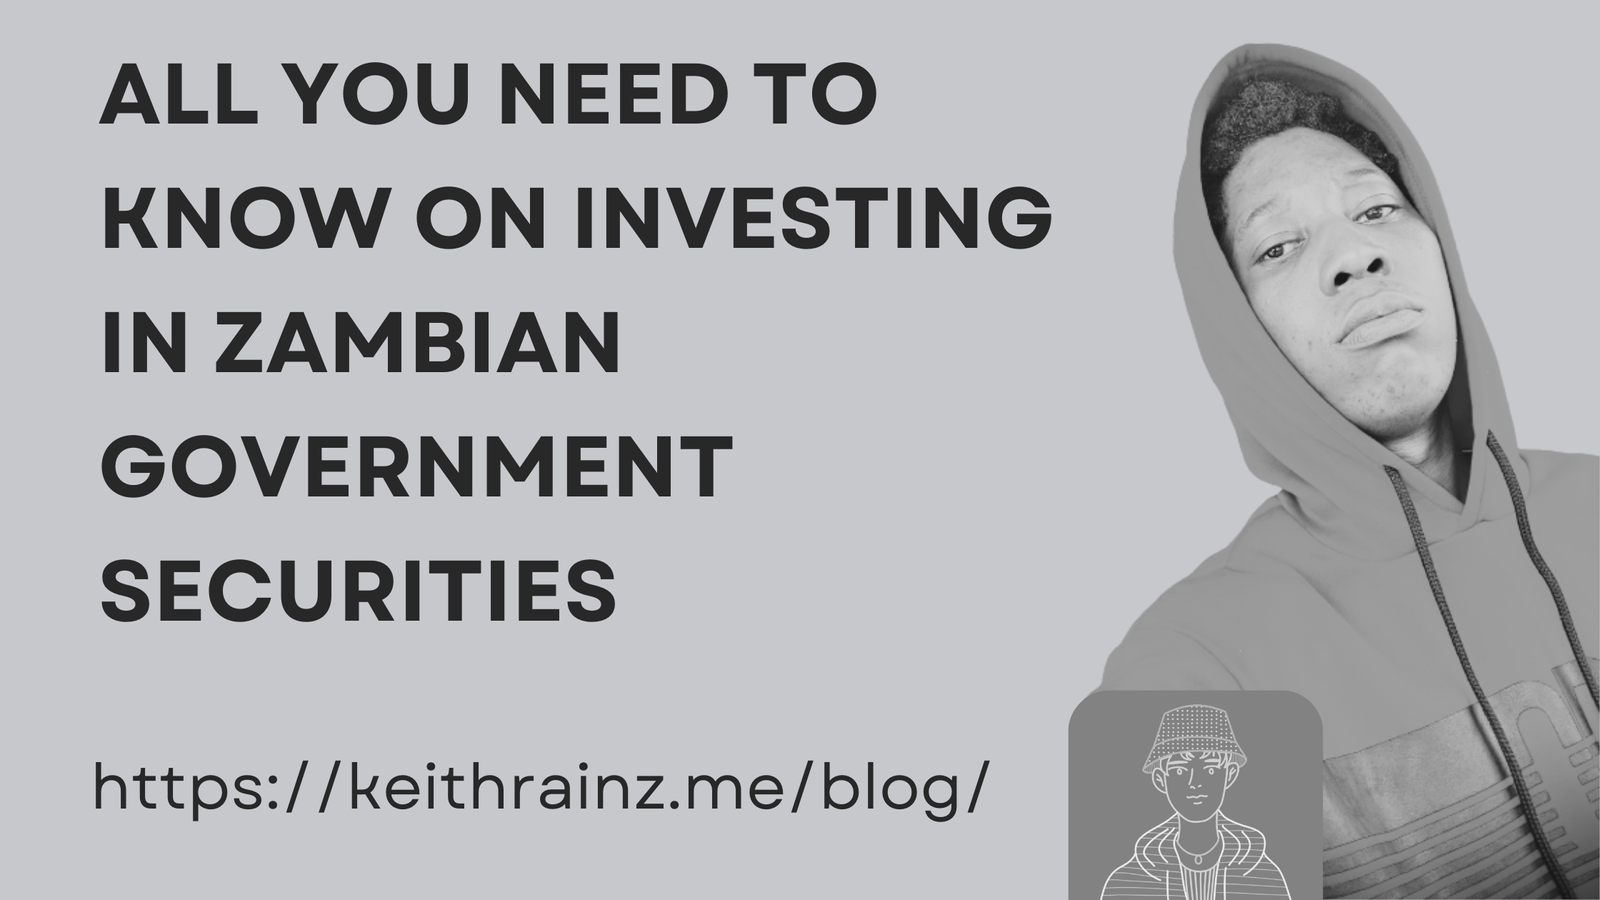 All you need to know on Investing in Zambian Government Securities